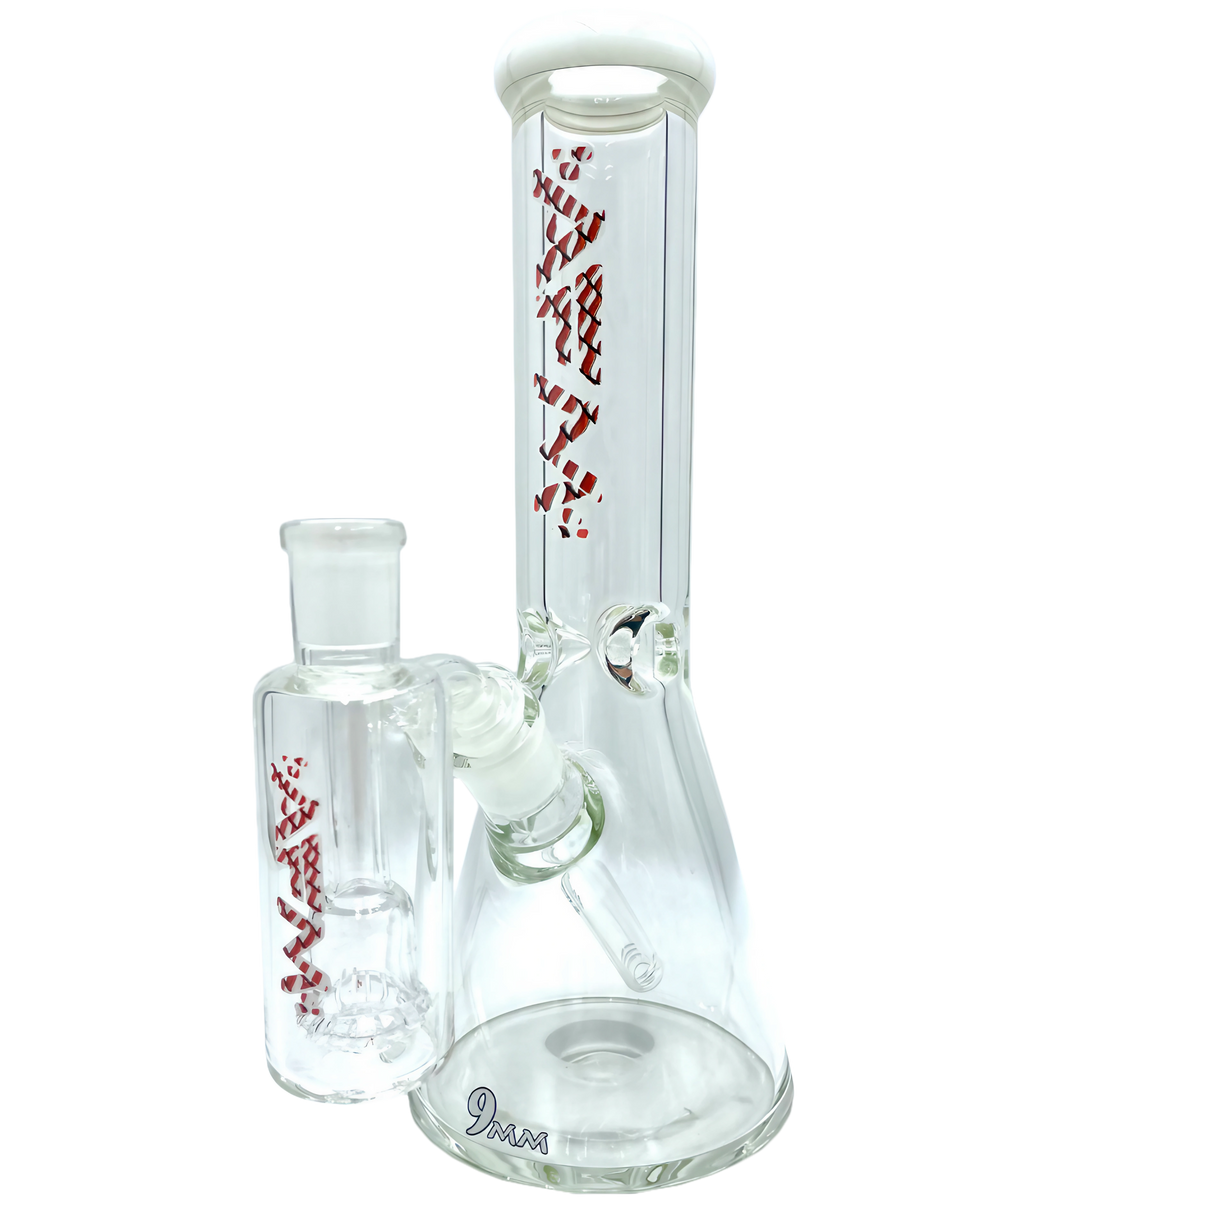 AFM The Heavy Boi 9mm Thick Glass Beaker Bong Set, 12" with Deep Bowl - Front View on White